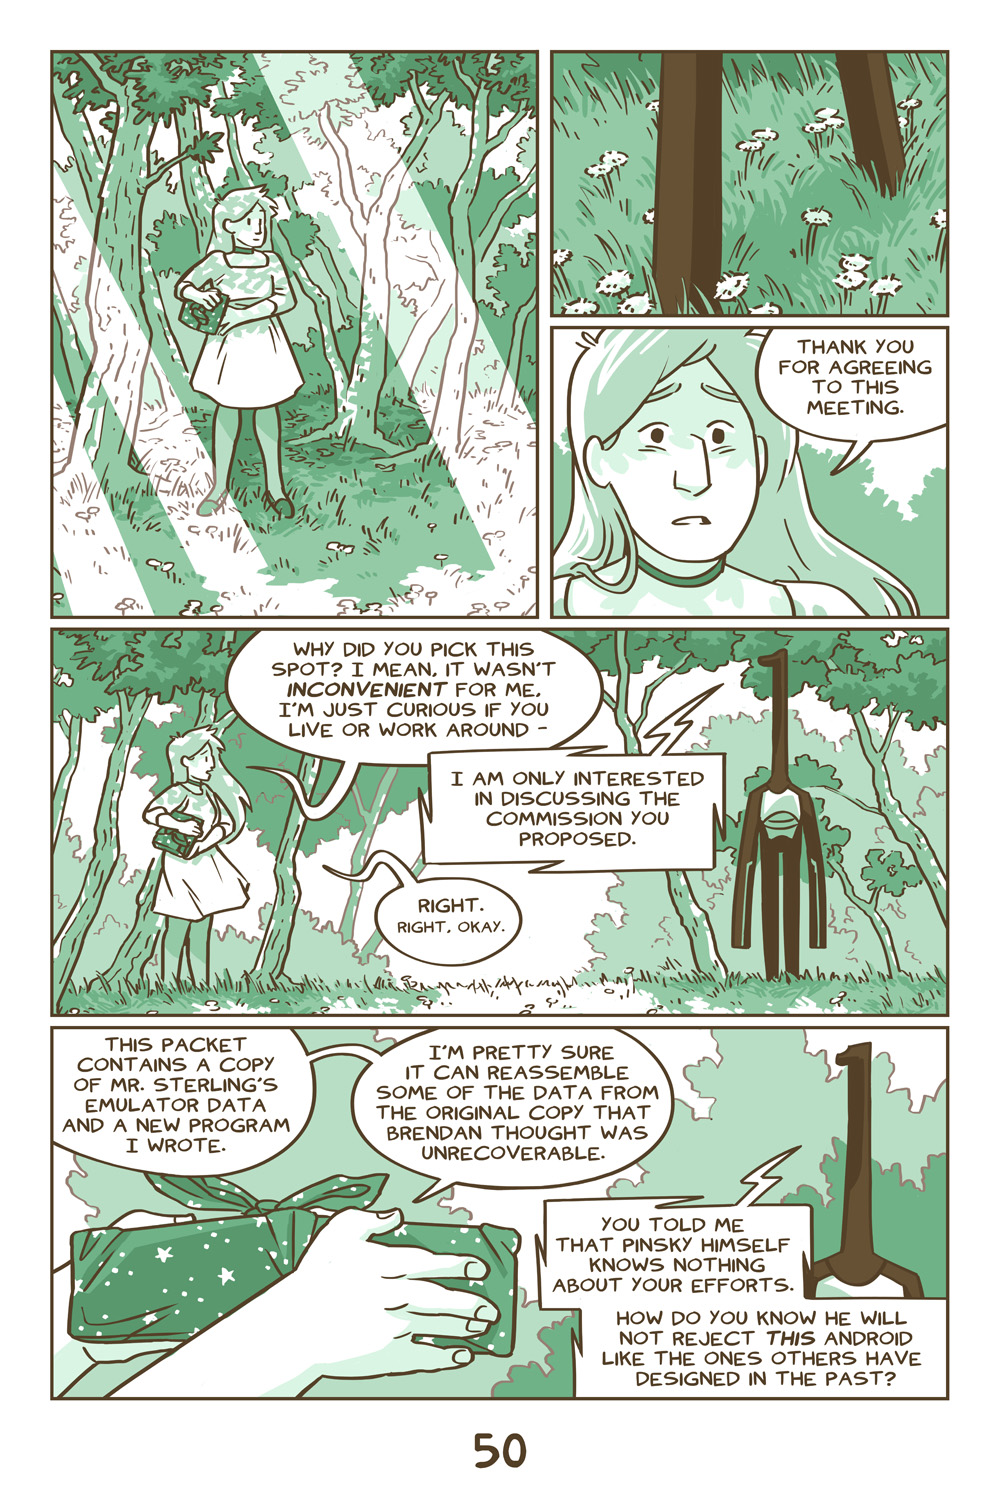 Chapter 7, Page 50